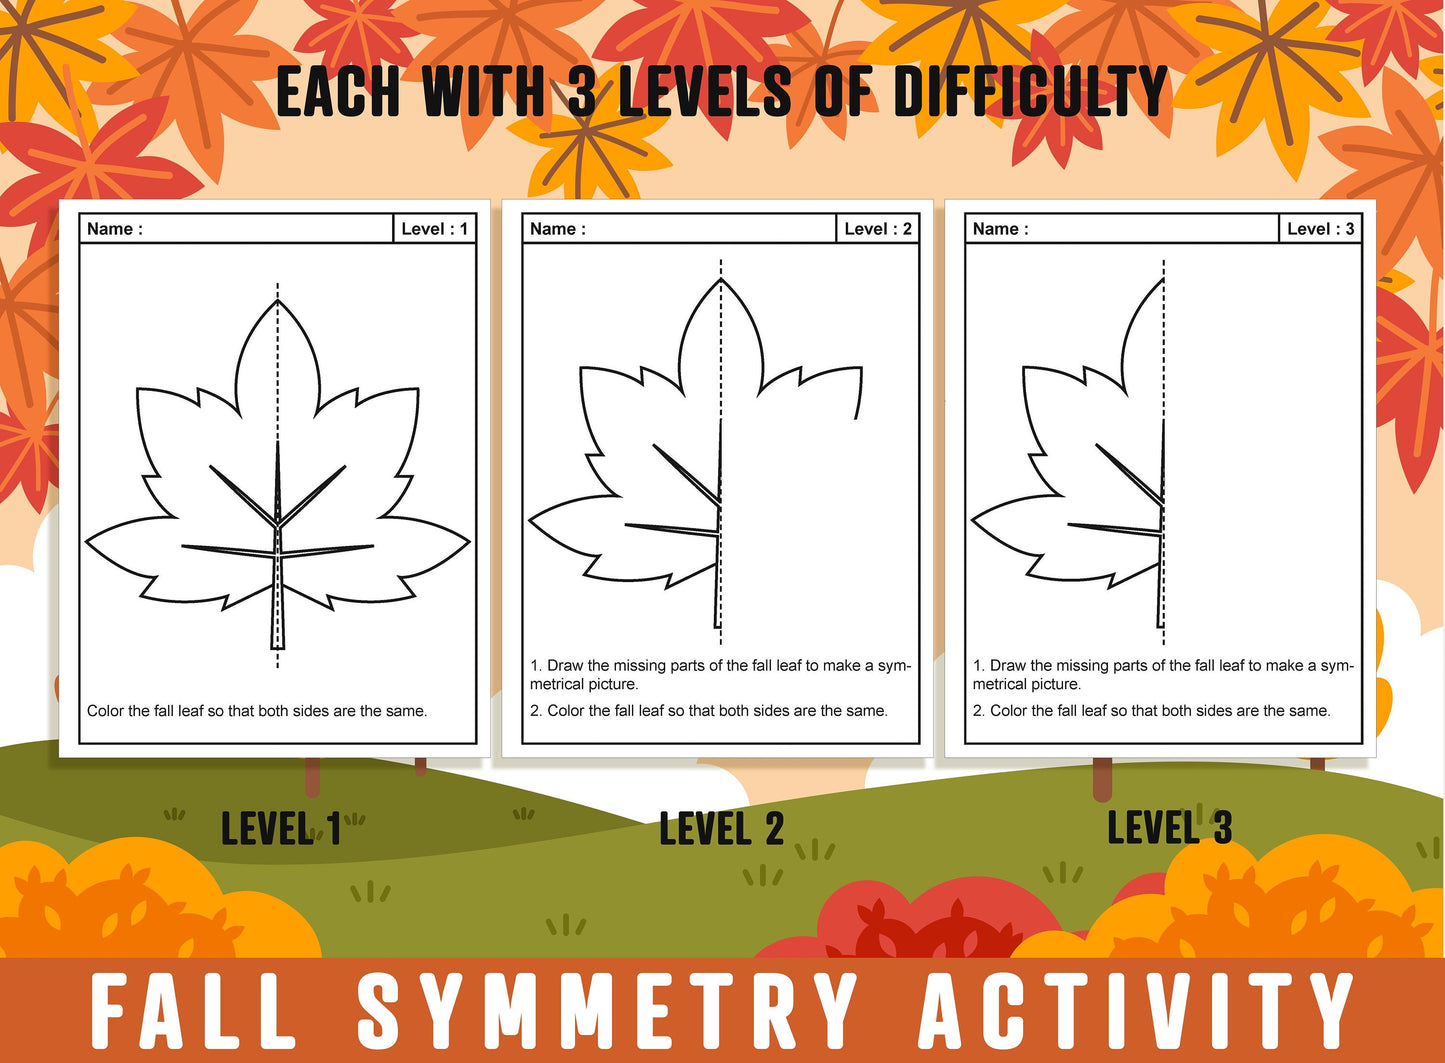 Fall Symmetry Worksheet, Autumn, Halloween, Thanksgiving Lines of Symmetry Activity, 24 Pages, 8 Designs, Each With 3 Levels of Difficulty